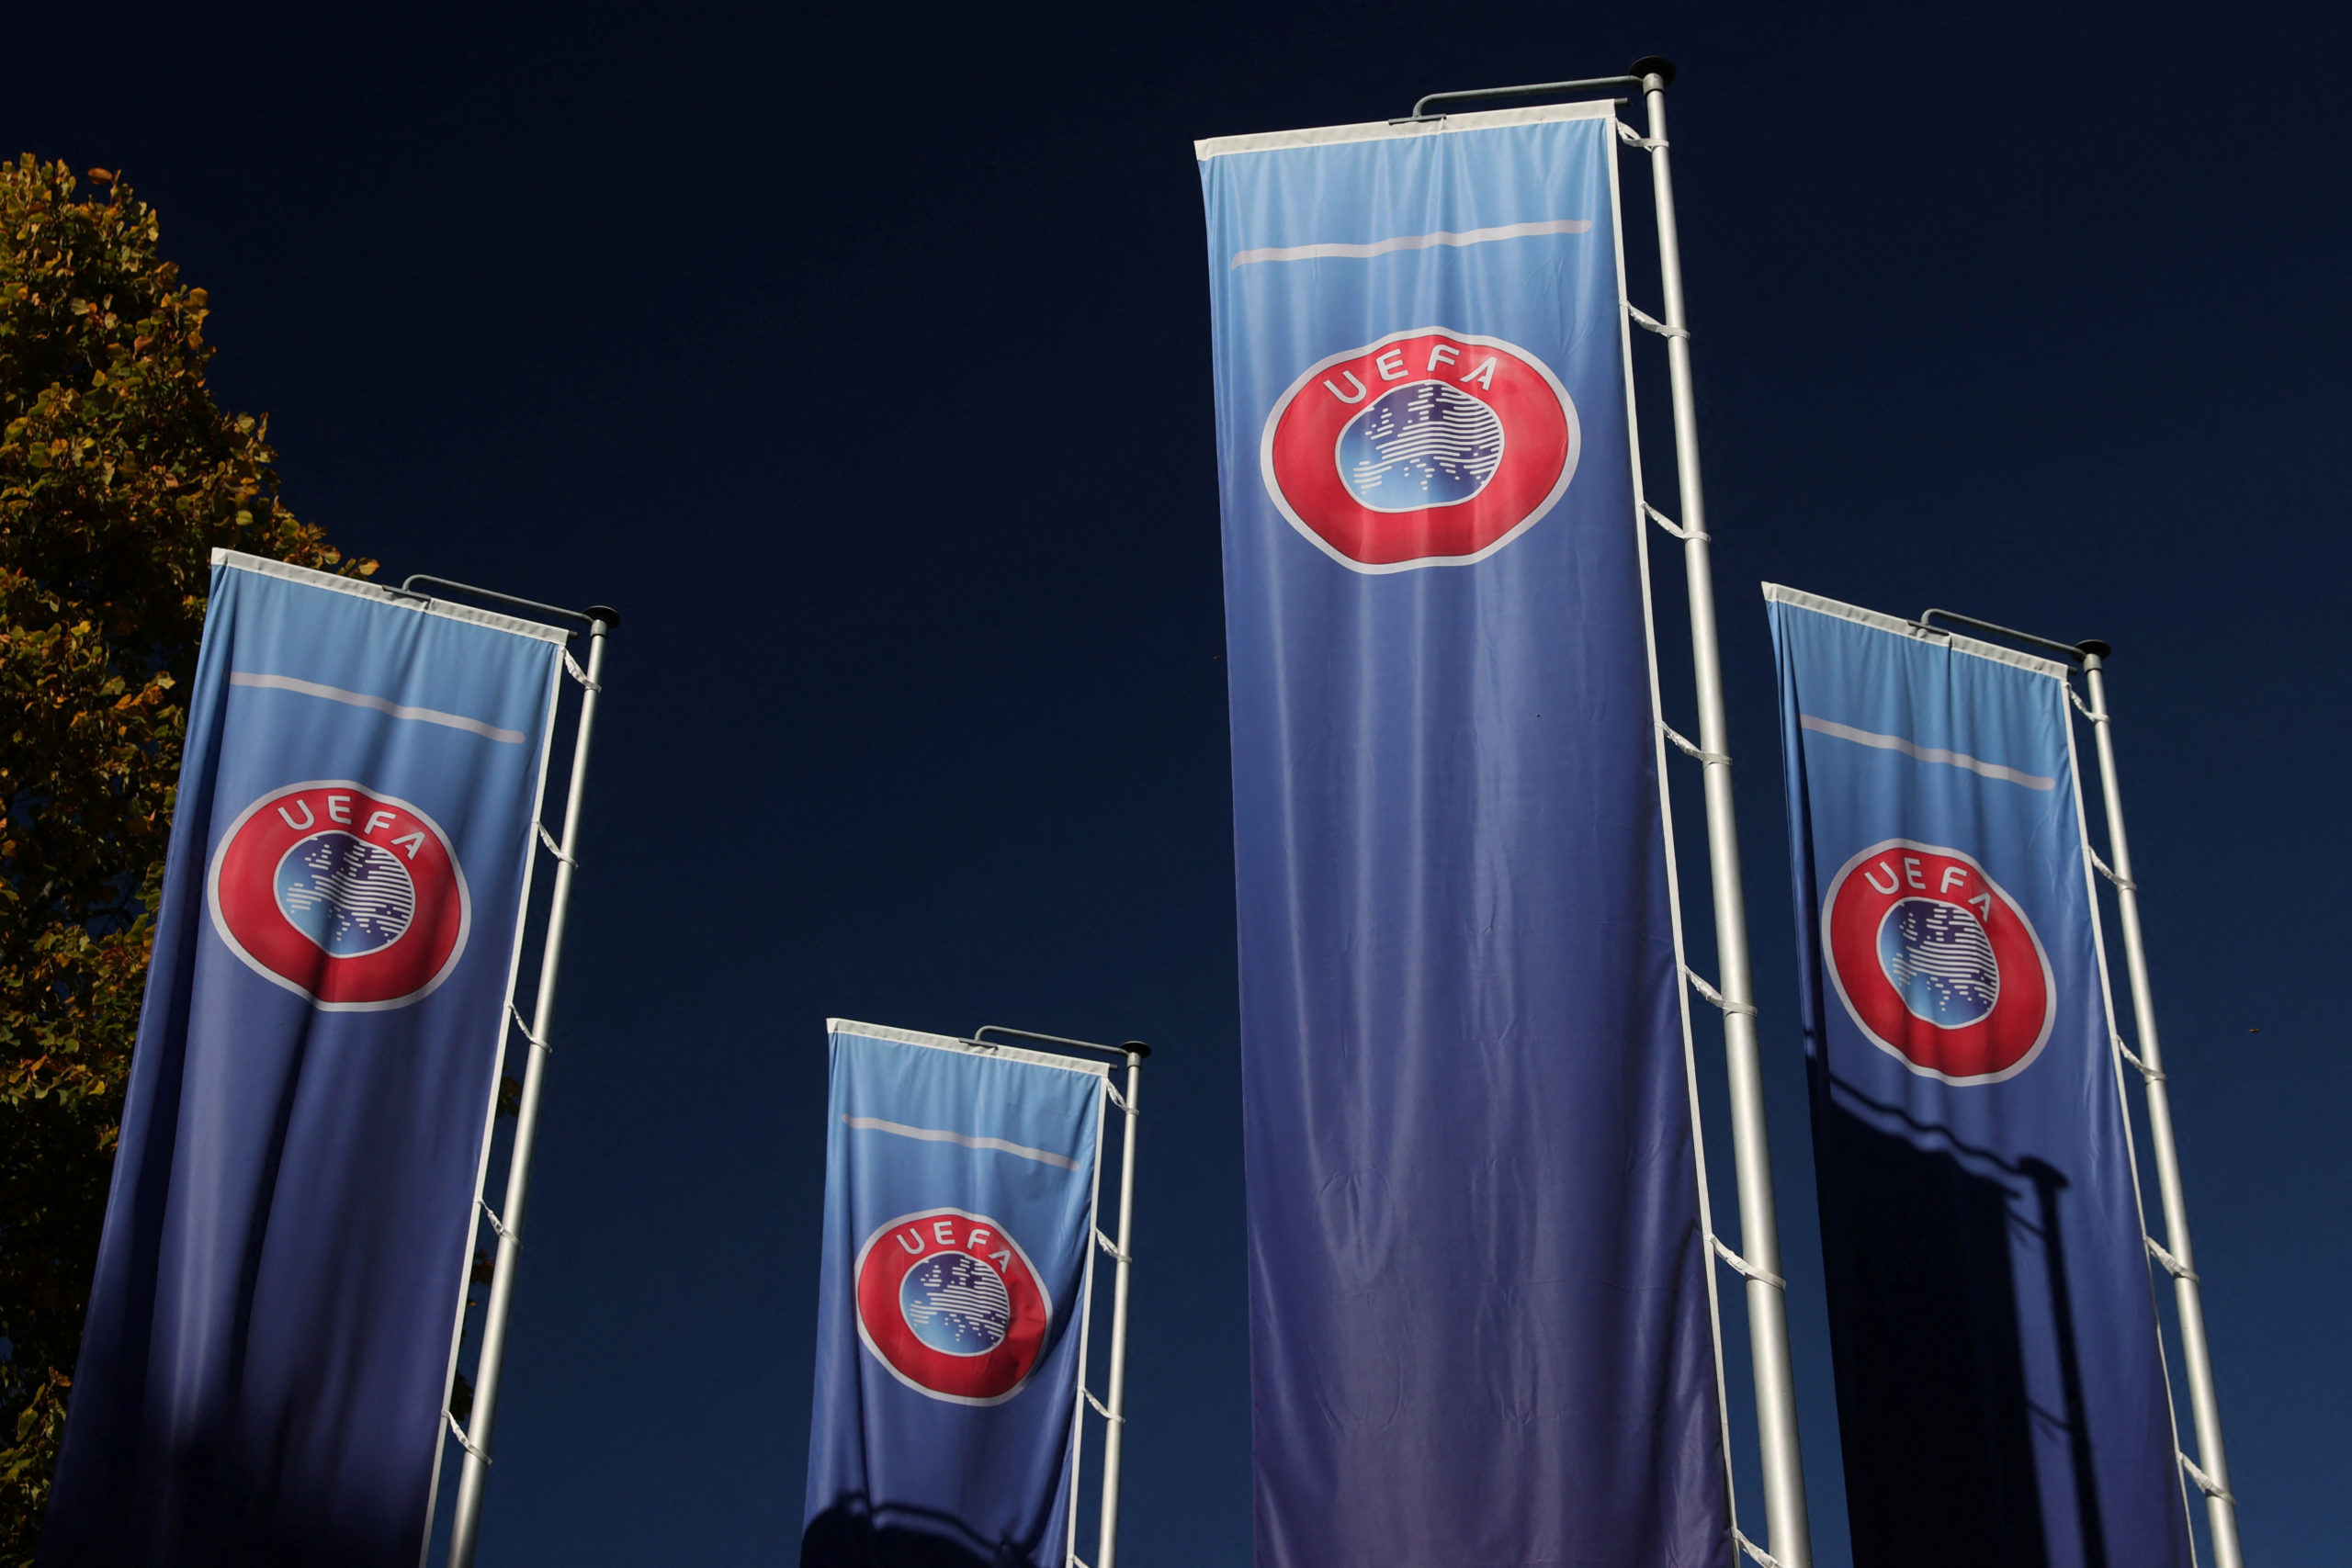 Flags with UEFA logo are seen in Nyon